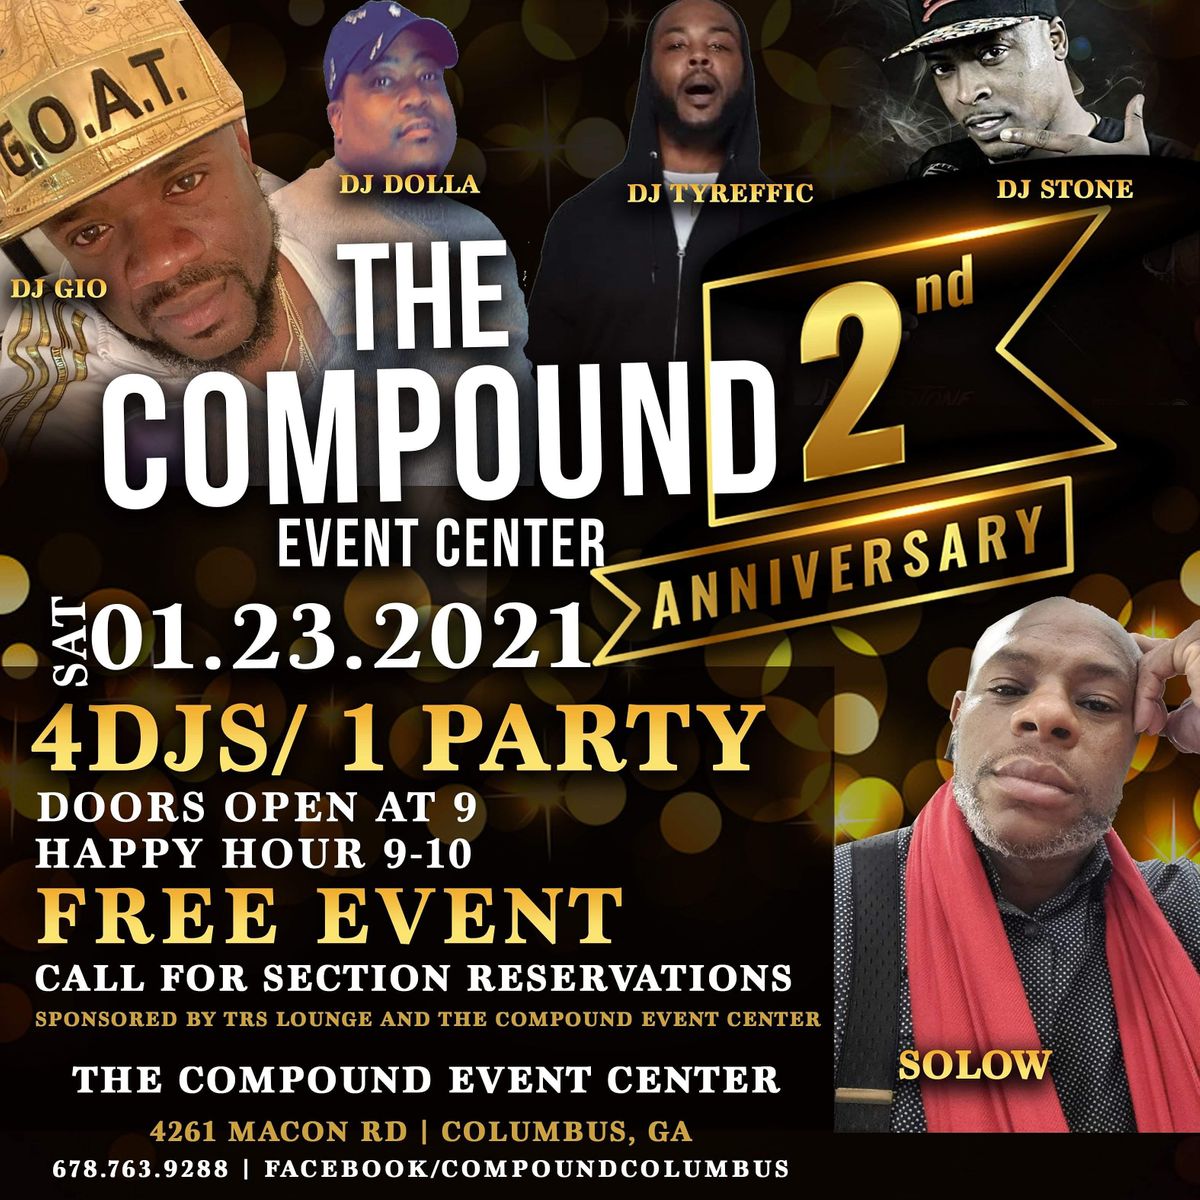 The Compound Event Center 2 year Anniversary Show